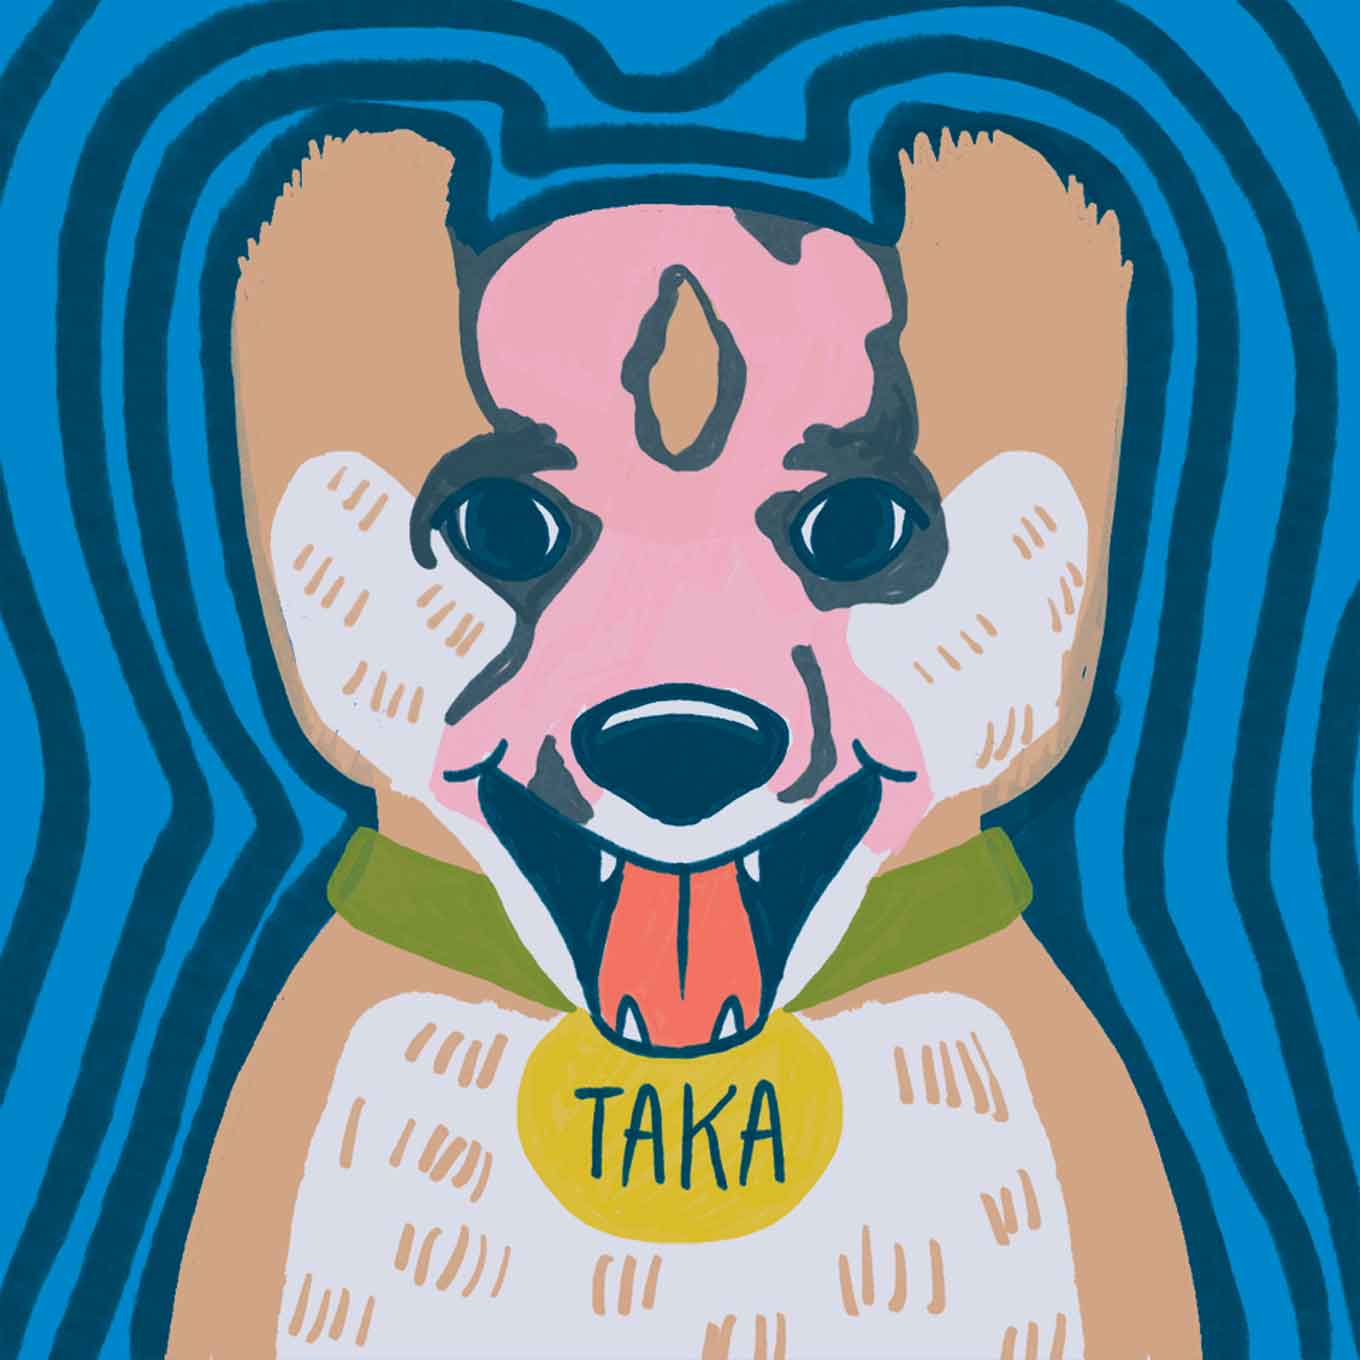 Taka the dog has a pink / skin mark on the front of its face after a burn